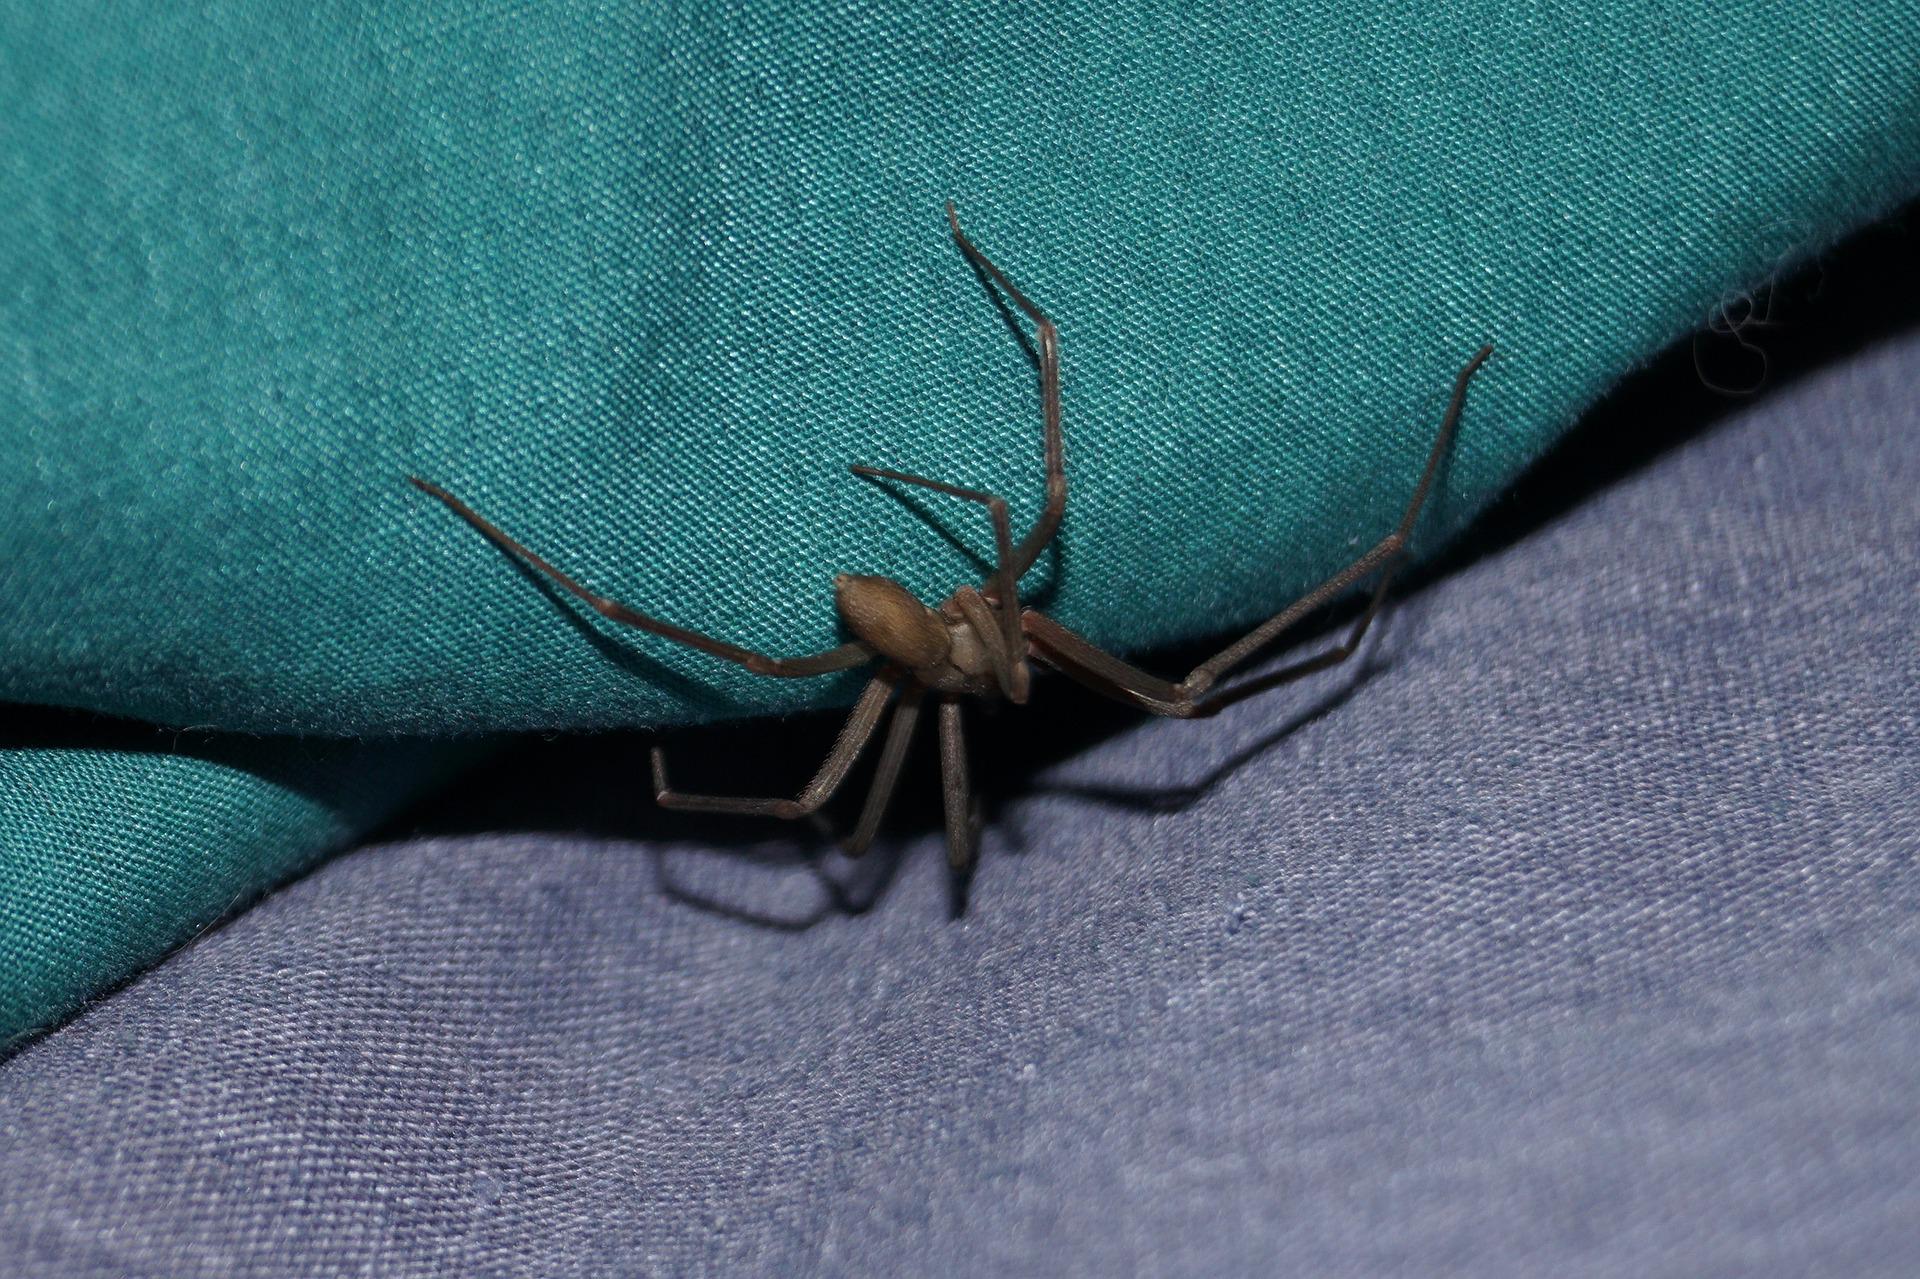 A brown recluse spider crawling on a blue cushion that rests on a grey cushion